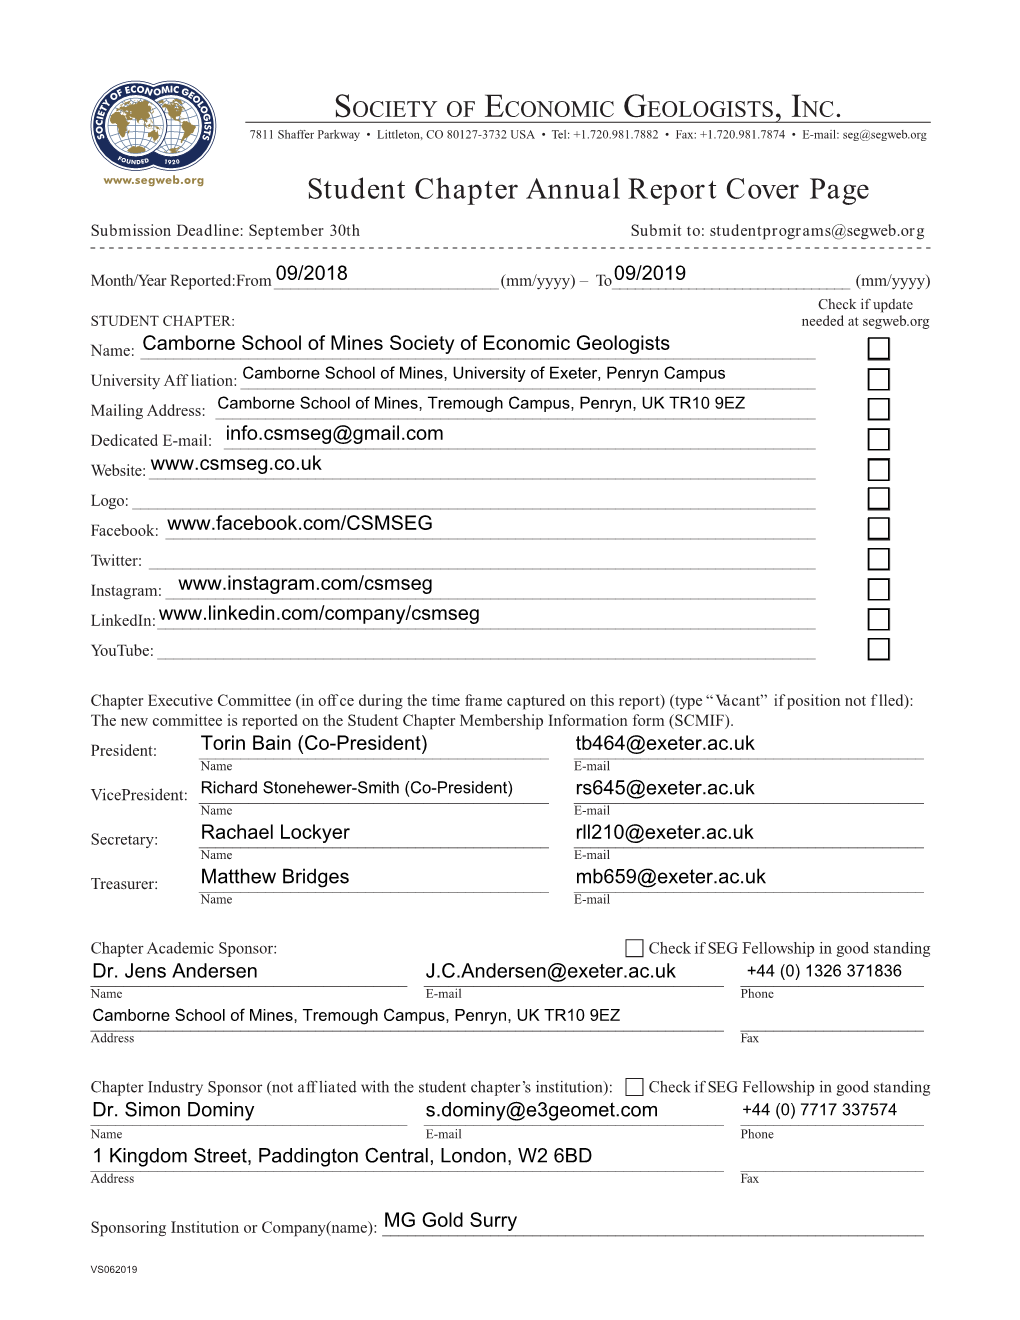 Student Chapter Annual Report Cover Page